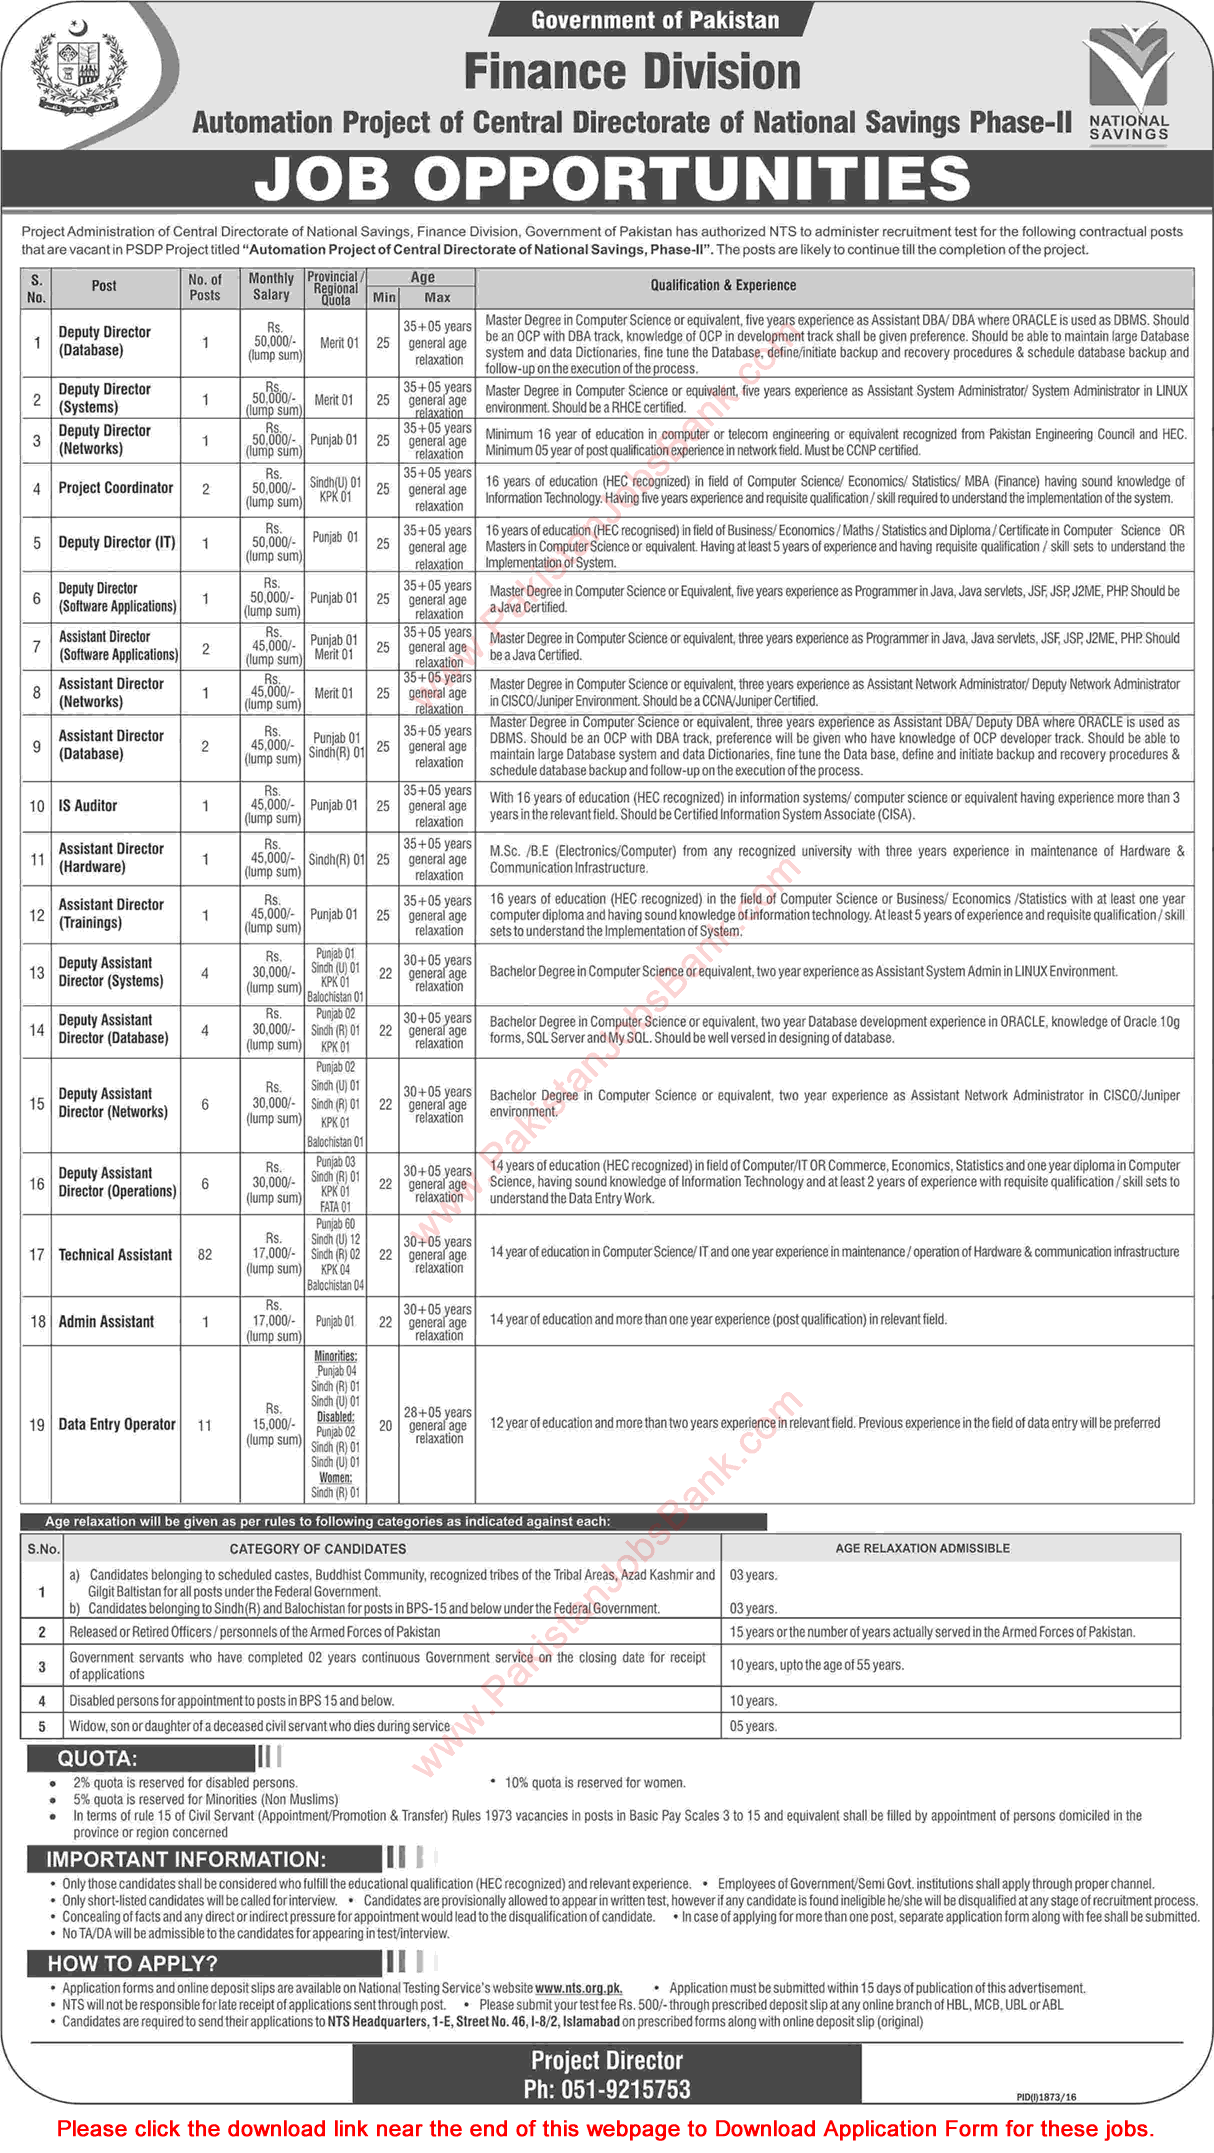 Finance Division Jobs 2016 October NTS Application Form Central Directorate of National Saving Project Latest / New